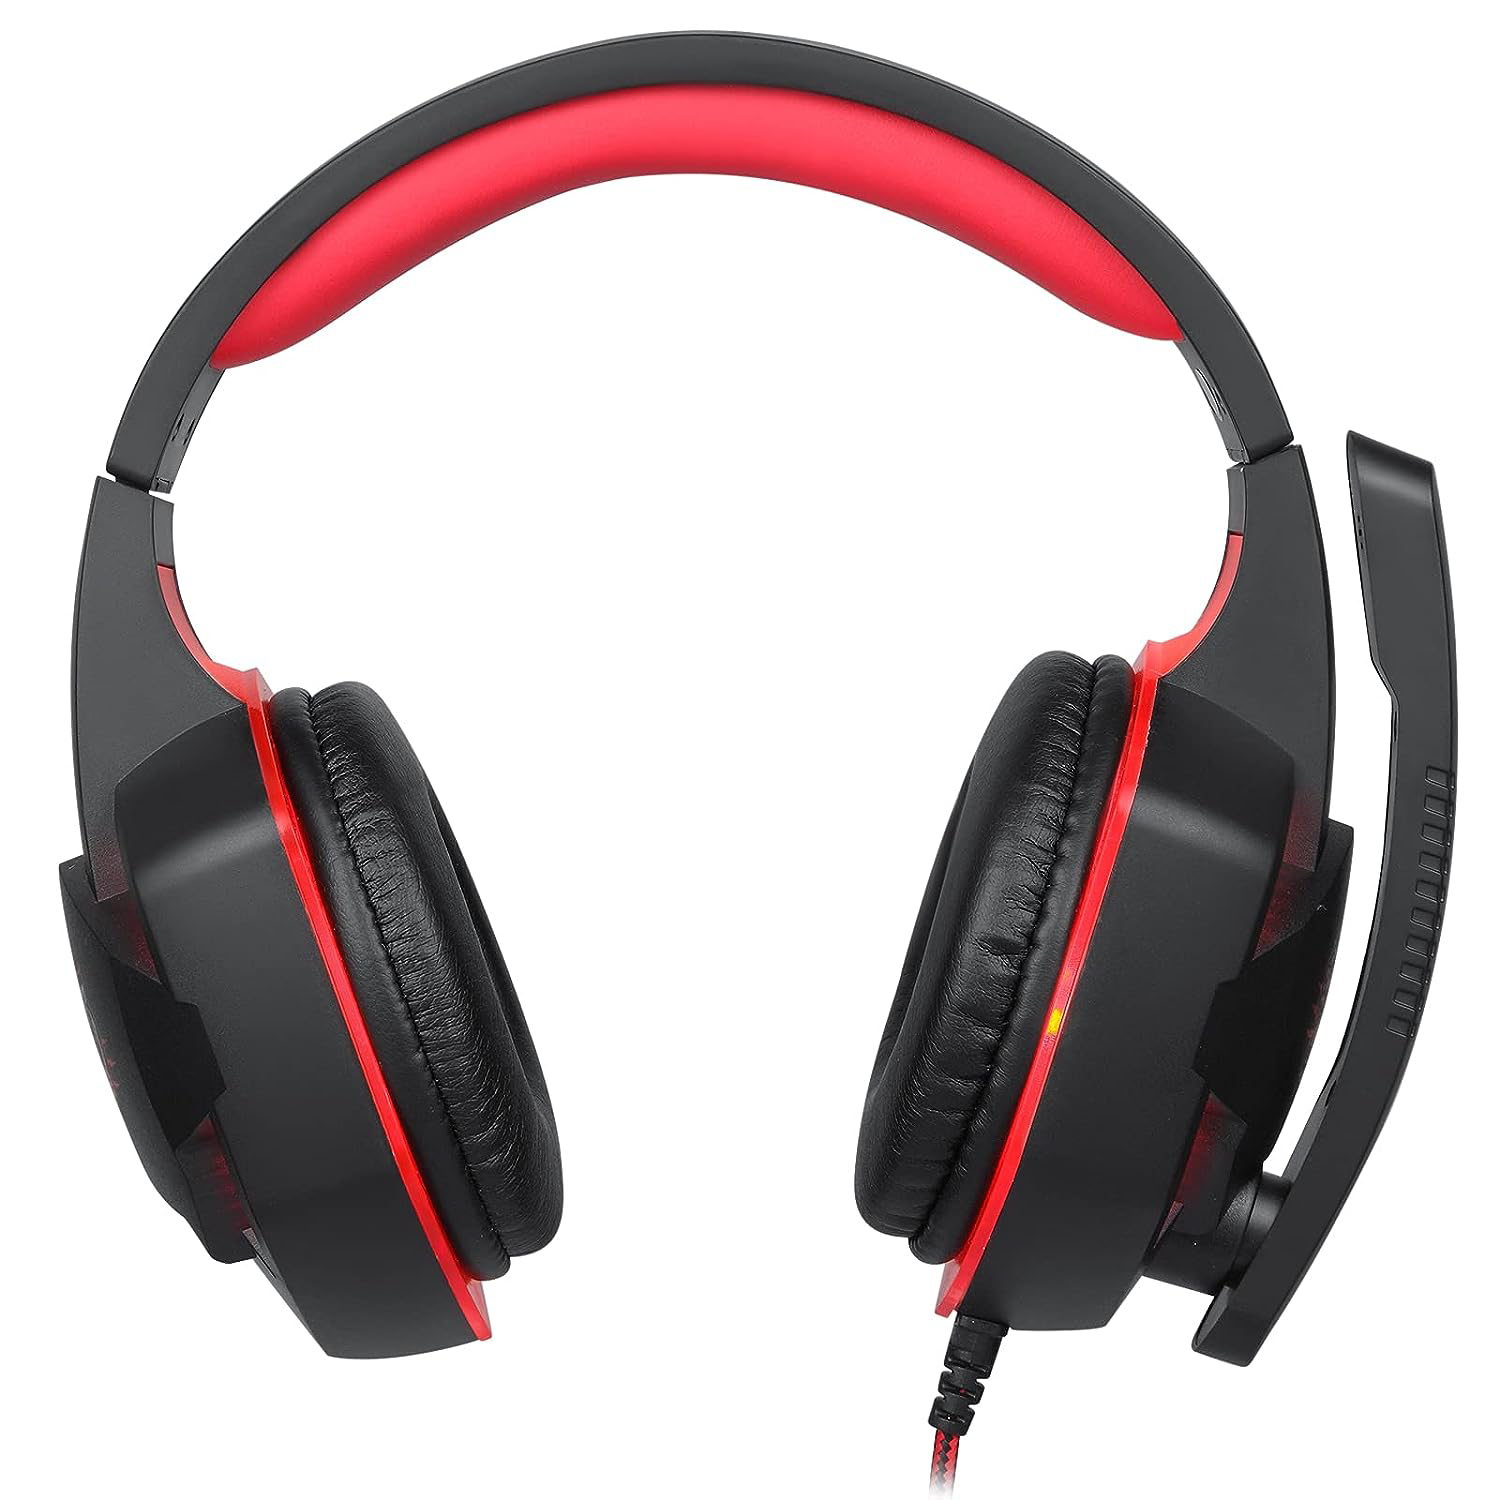 Enter enter GANGSTA Wired Gaming Headphone with 40mm Driver, Adjustable Headband with LED Lights and Passive Noise Cancellation with Free Y Splitter ( Black & Red)